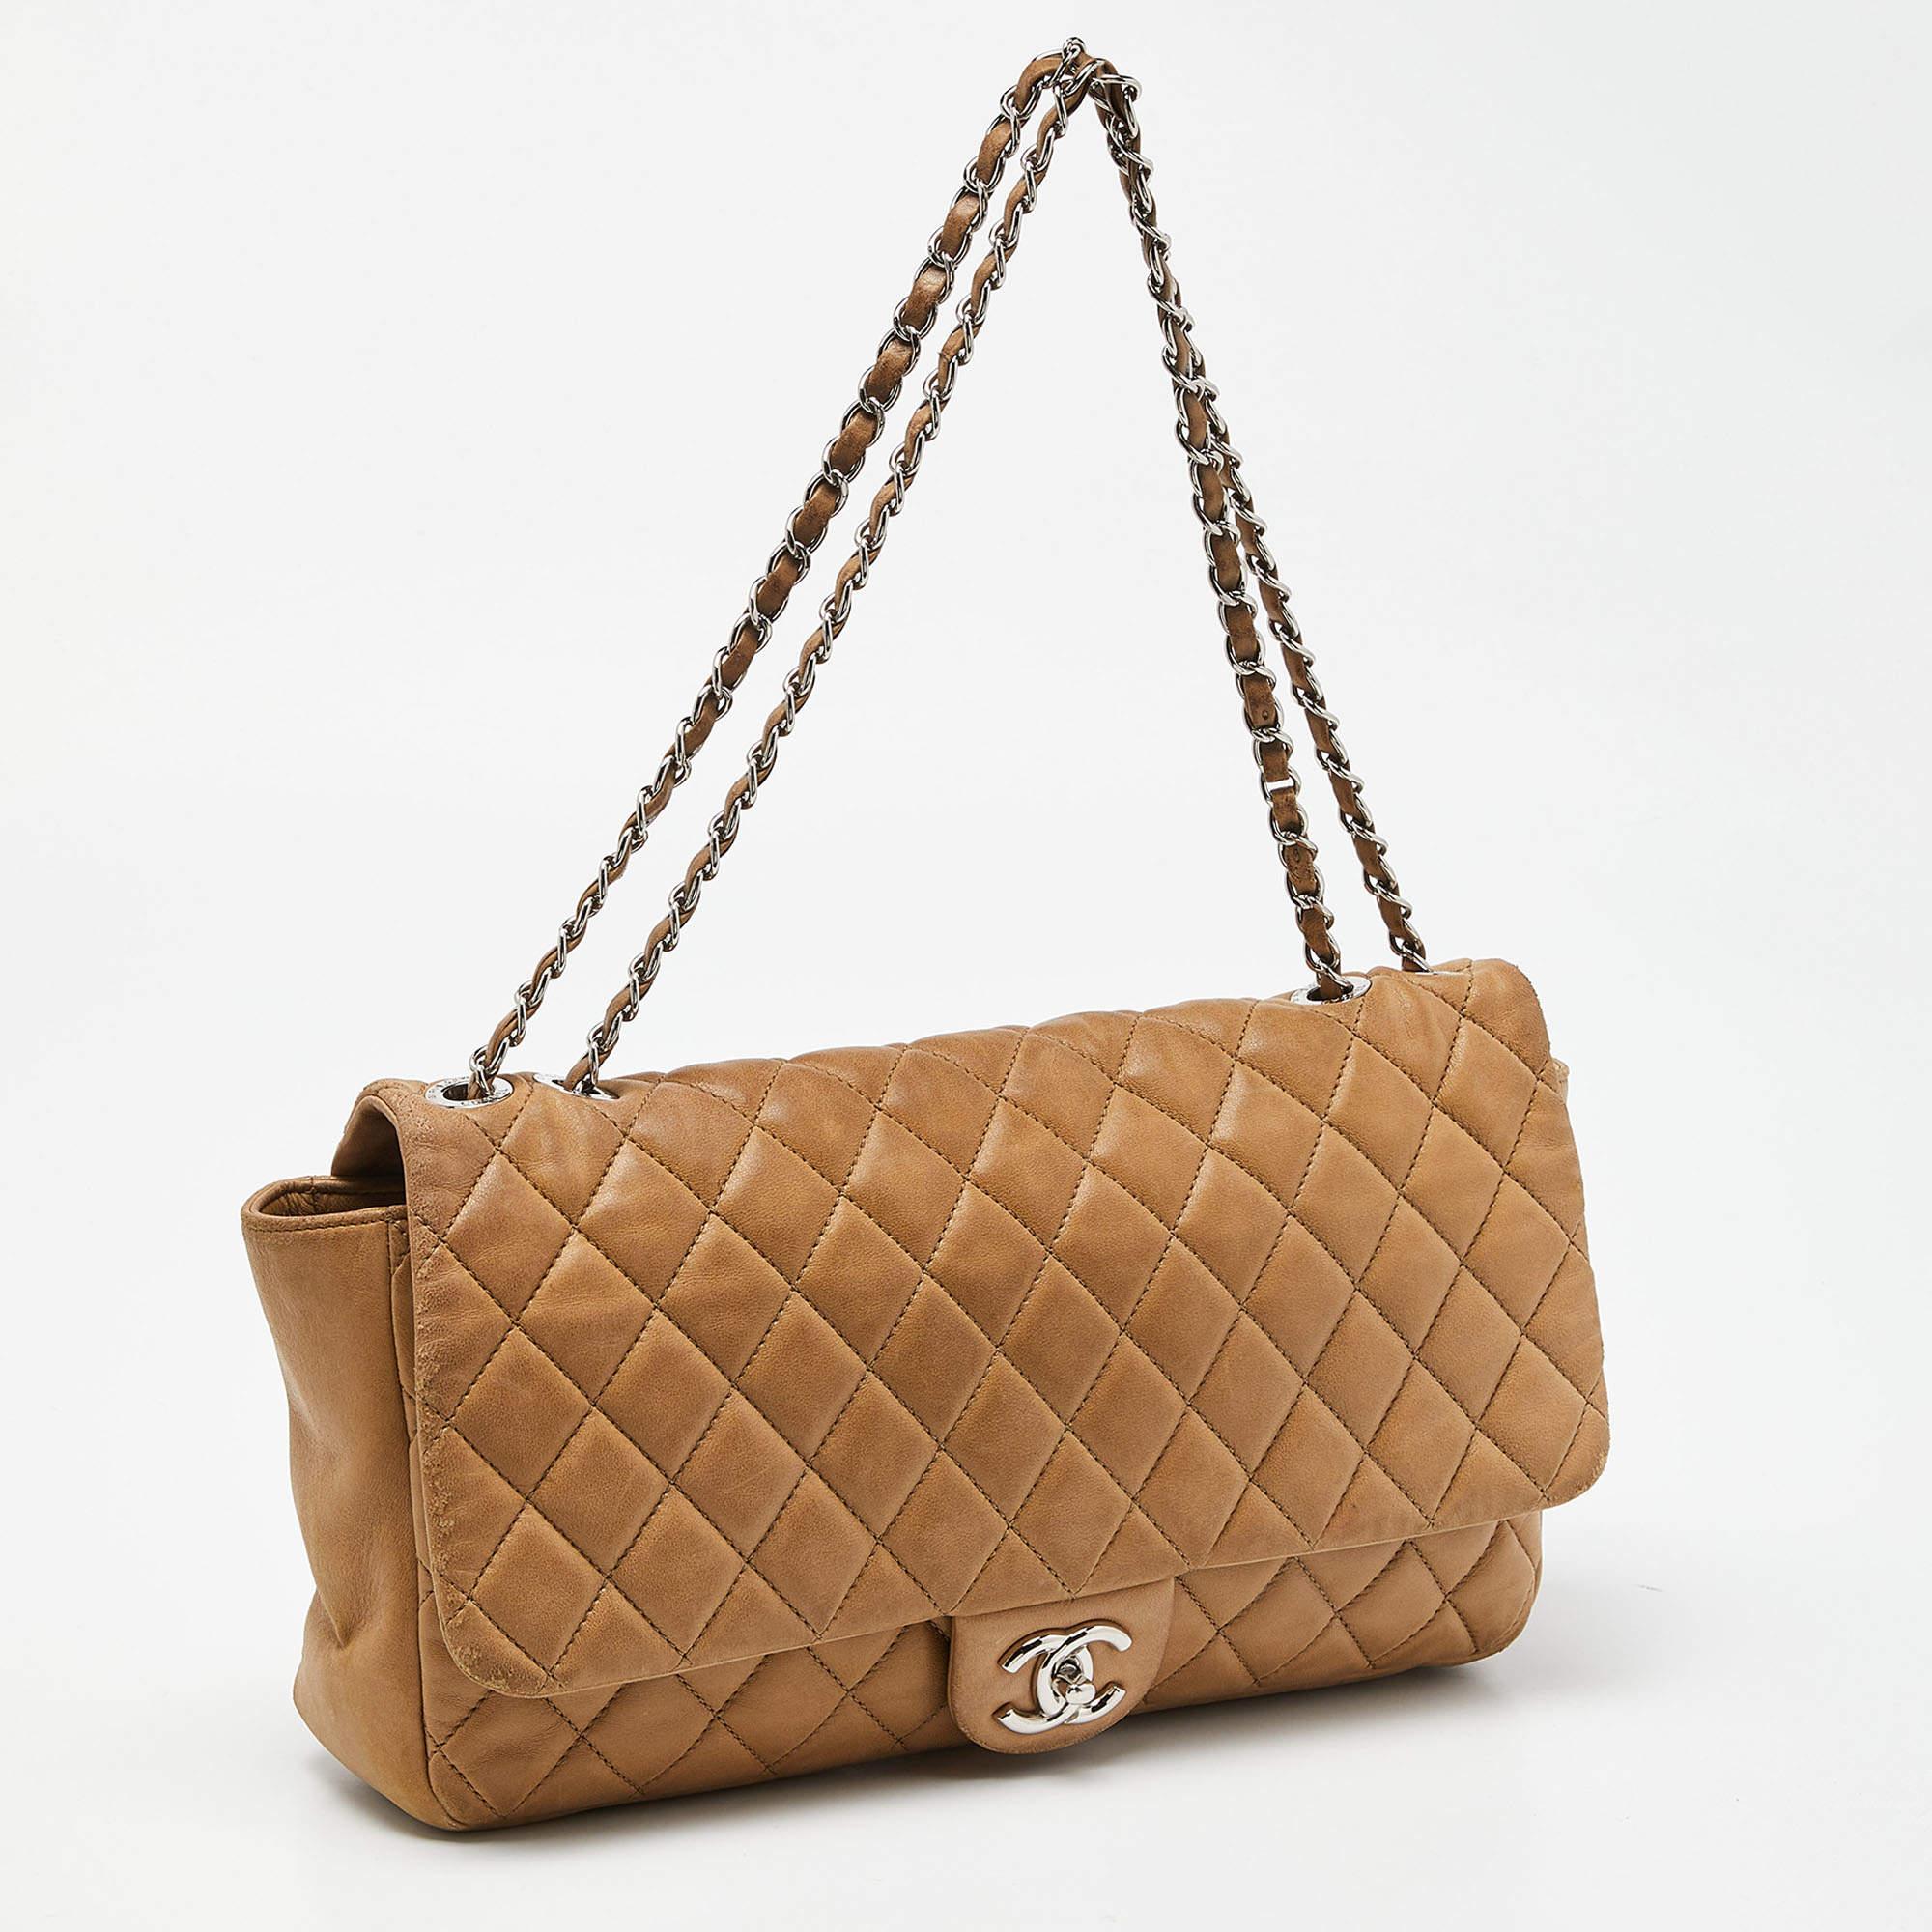 Chanel Beige Quilted Leather Jumbo Coco Rain Flap Bag 6